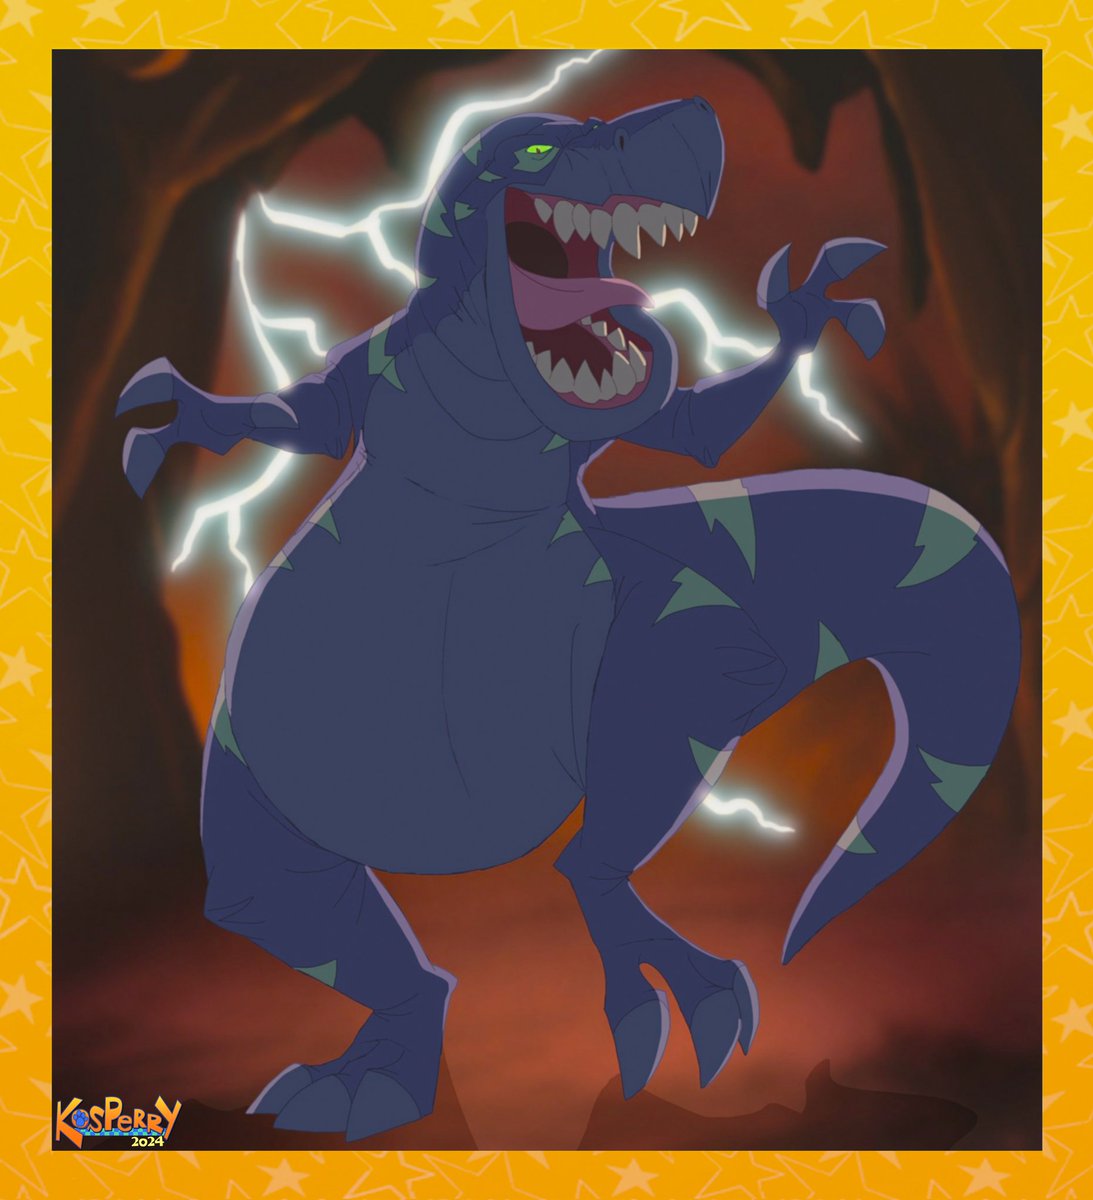 The Grarrl makes an electrifying entrance! 🦖⚡A strong & powerful Neopet, always prepared to show off their stuff in the Battledome! Don't let their thundering demeanor, loud roars, and sharp toothy grin scare ya too bad...They'd be glad to get a friendly bite to eat with you!